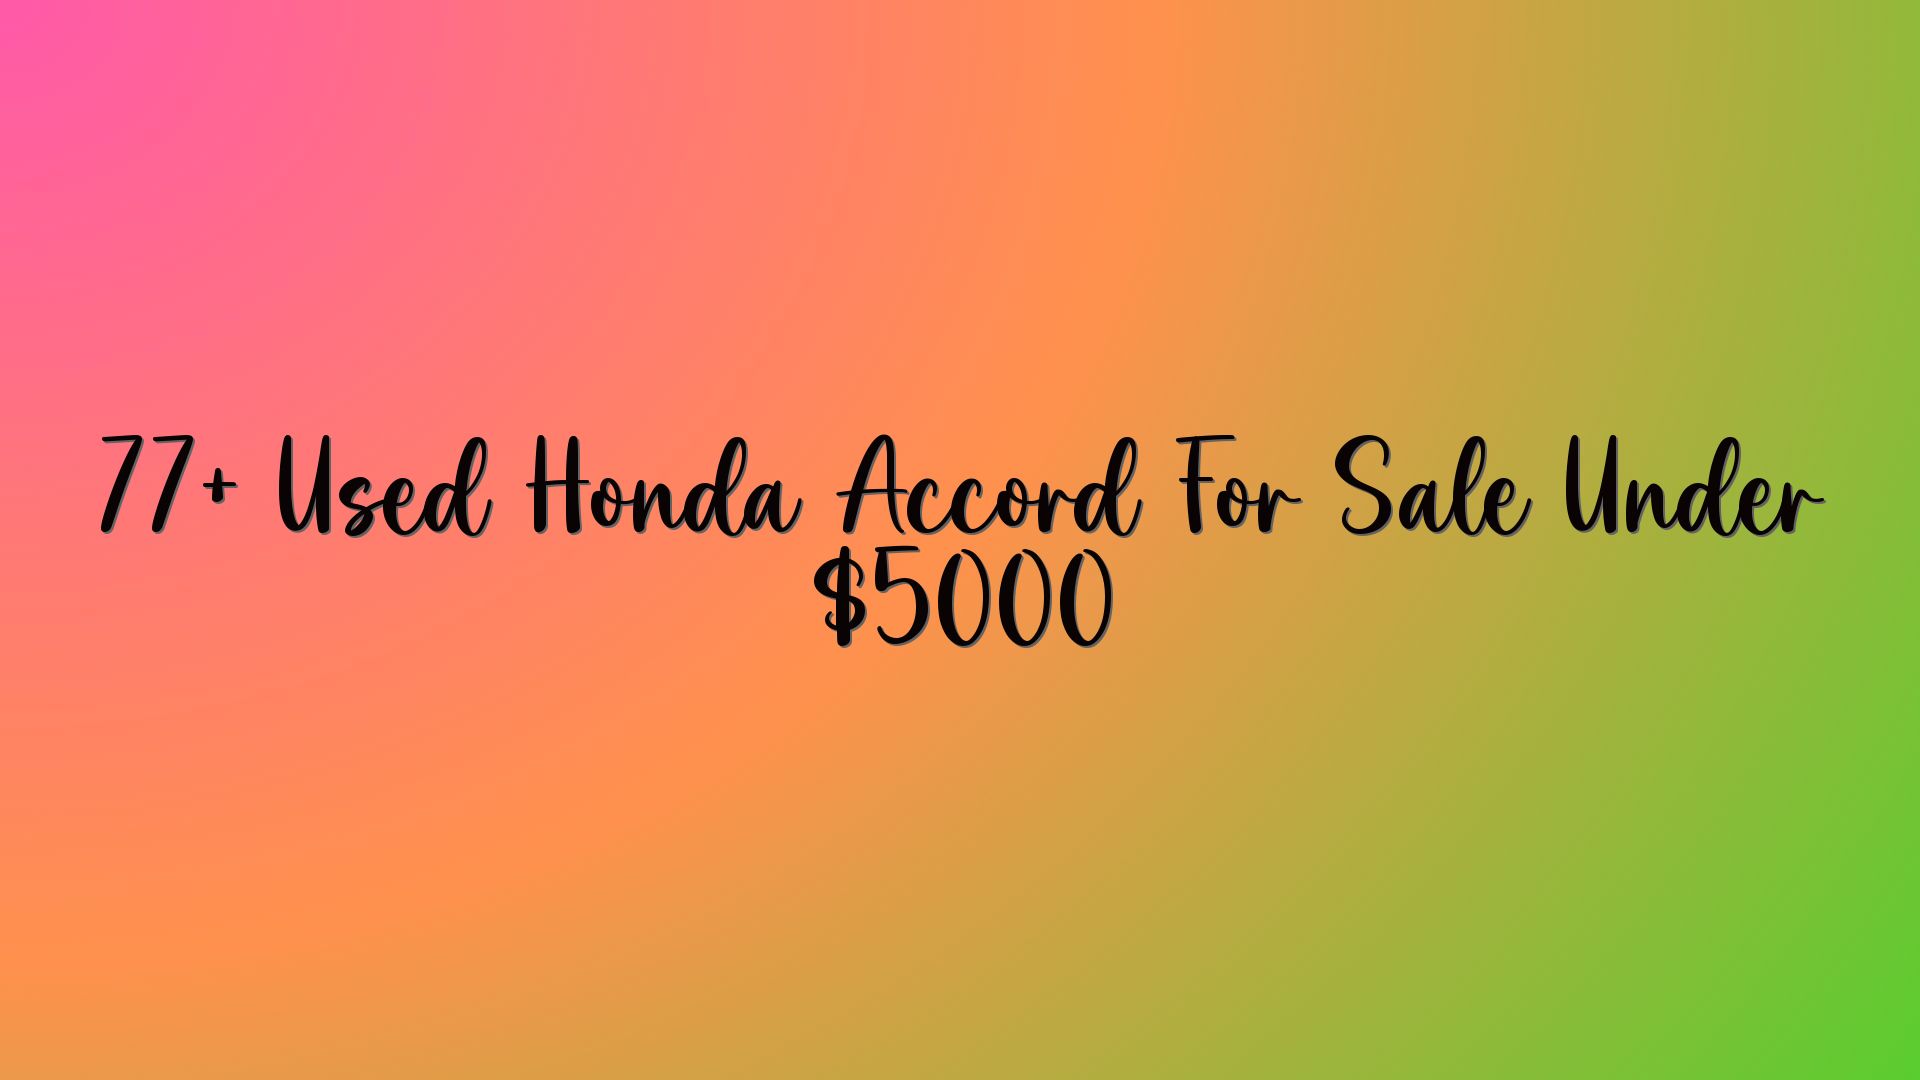 77+ Used Honda Accord For Sale Under $5000